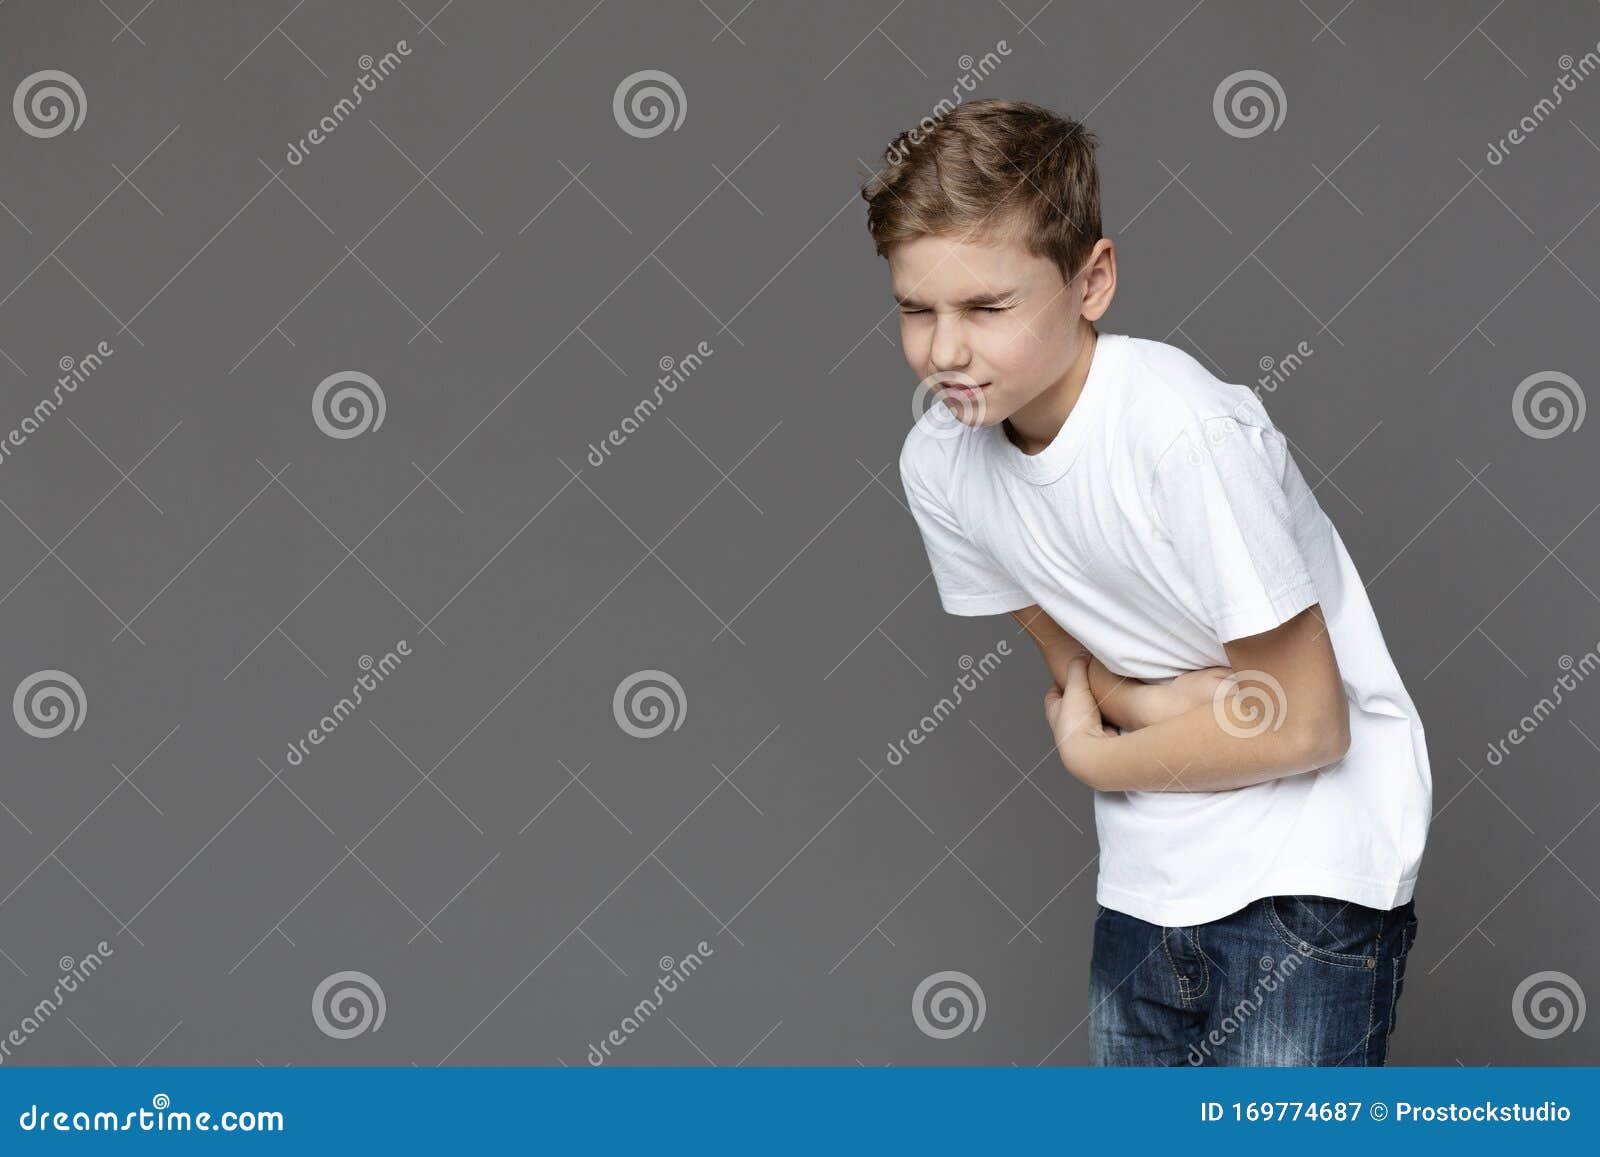 teen boy suffering from stomachache, grey background